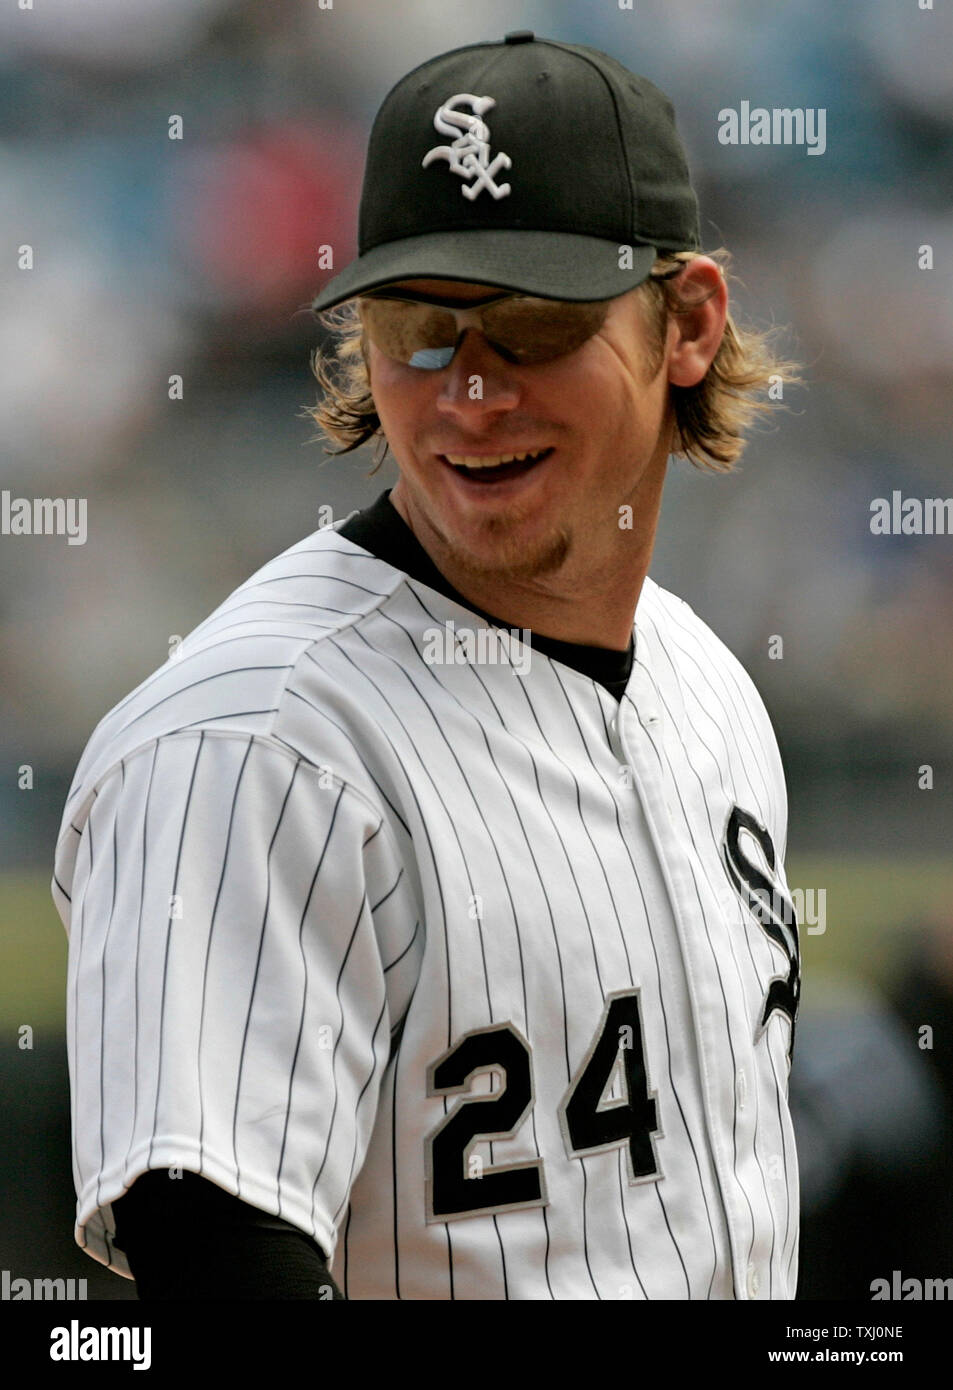 Chicago White Sox third baseman Joe Crede walks back to the dugout during  the eighth inning against the Kansas City Royals on April 19, 2006 in  Chicago. Crede and catcher A.J. Pierzynski